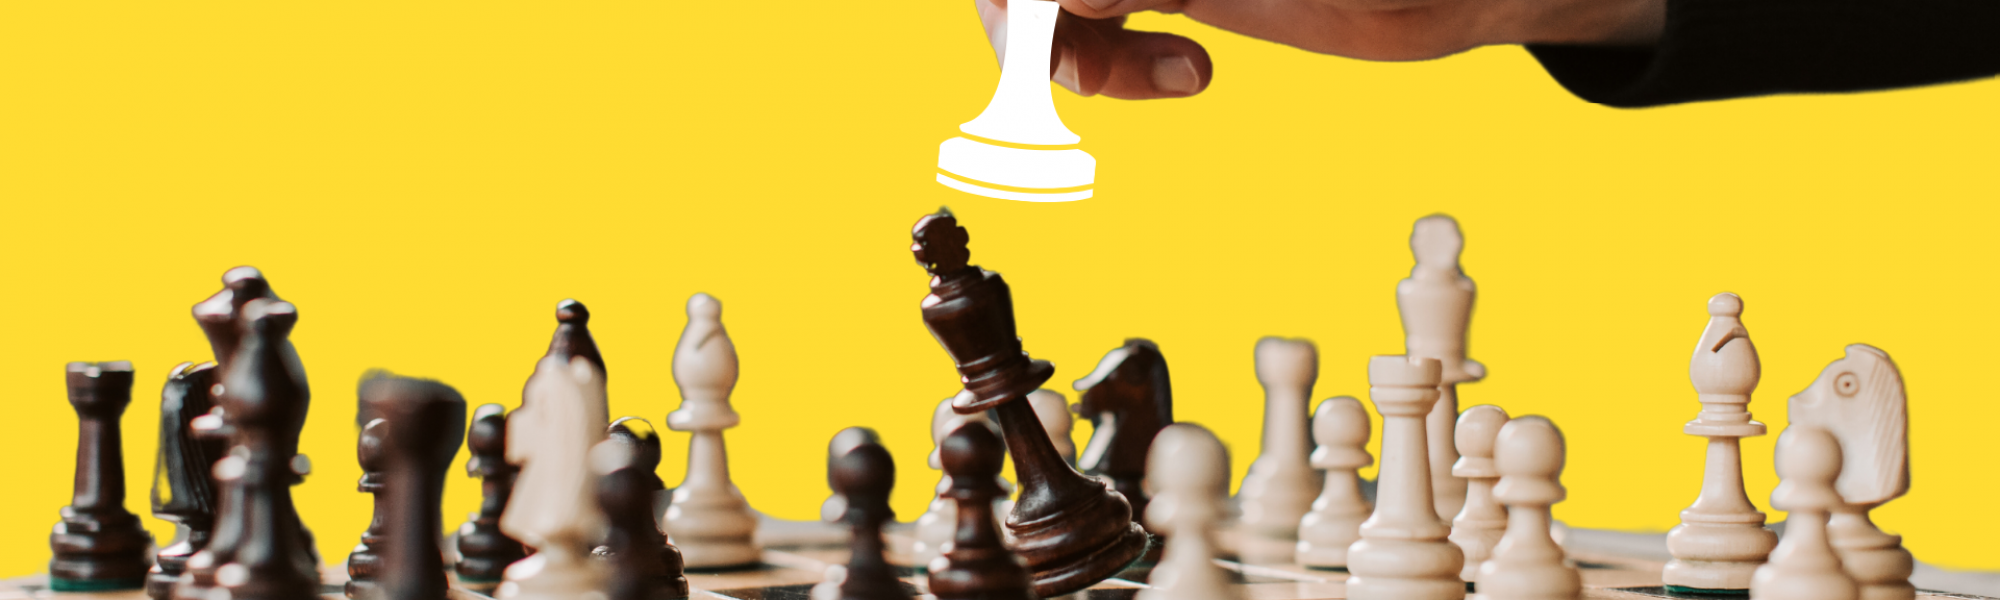 A hand placing a chess piece down on a chess board